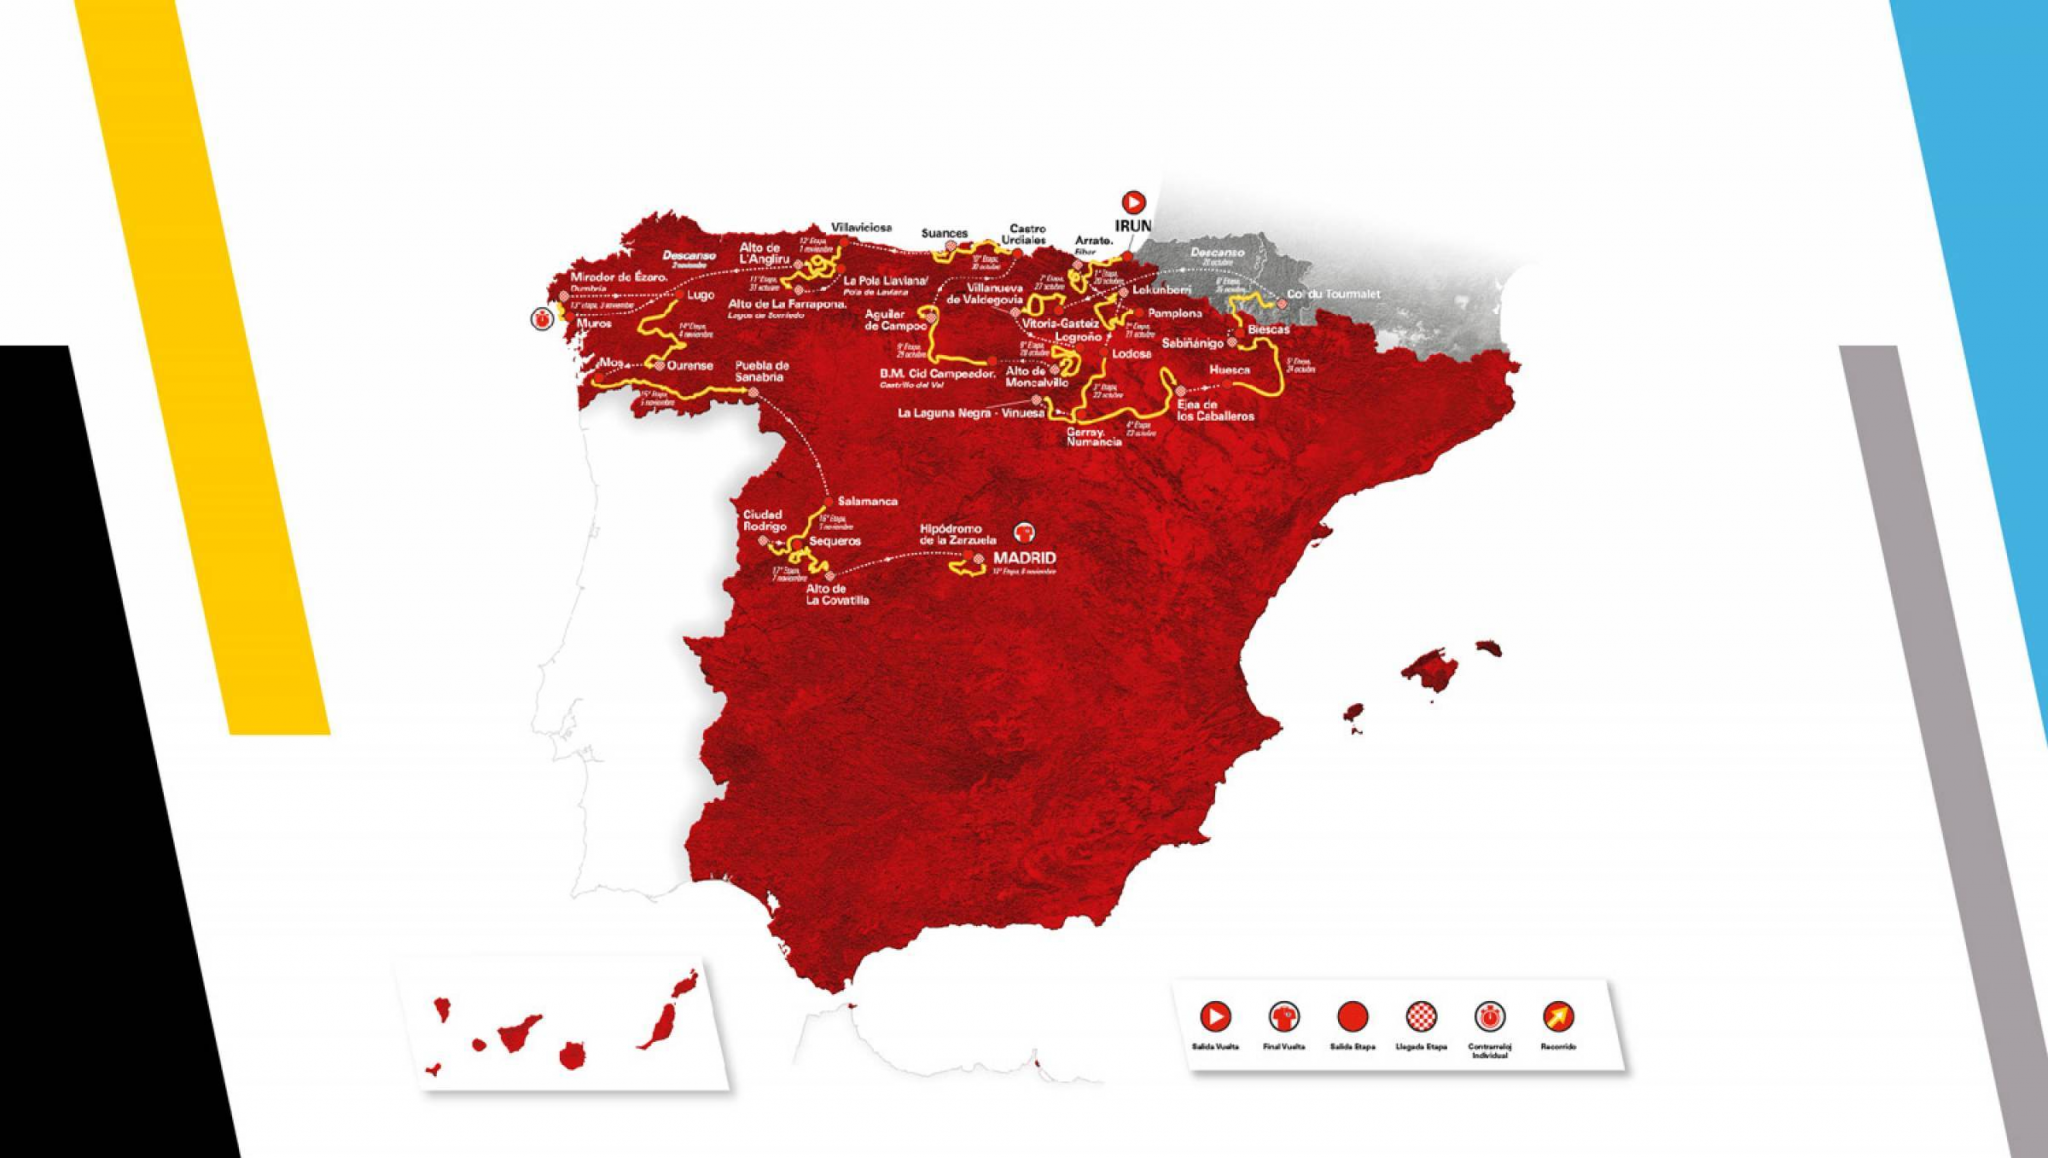 Organisers reveal updated route for Vuelta a España